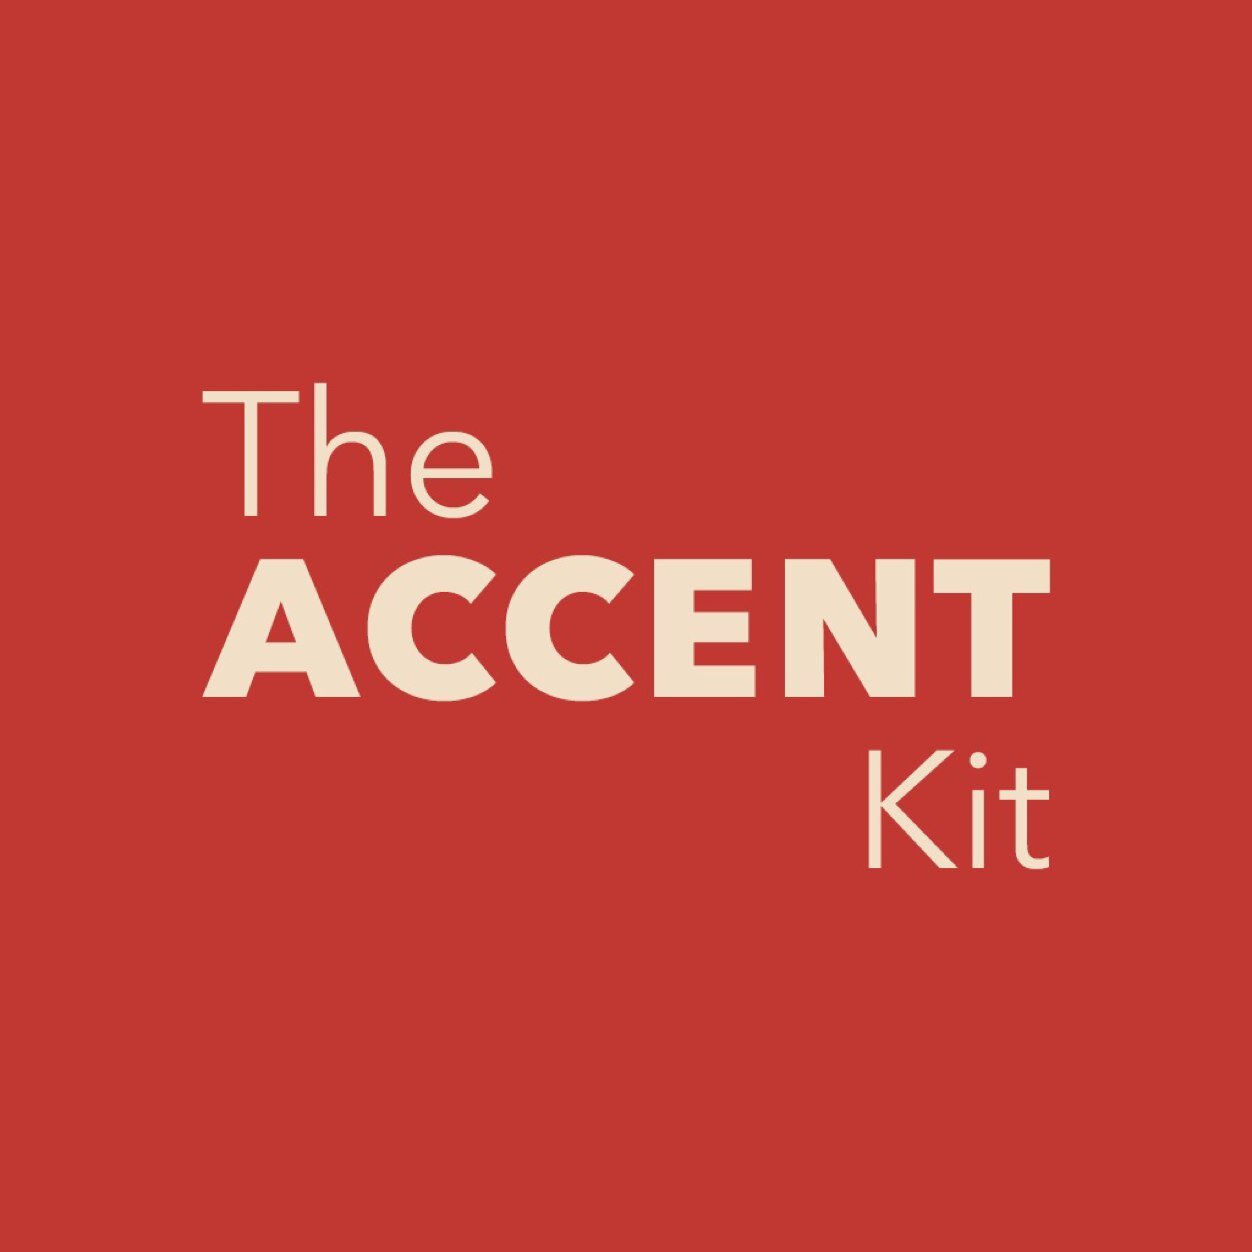 Specialised accent coaches sharing accent top tips and facts. 
UPDATED WEBSITE. You can now create your own account
The ACCENT Kit app: ios https://t.co/KeeDmjtK67